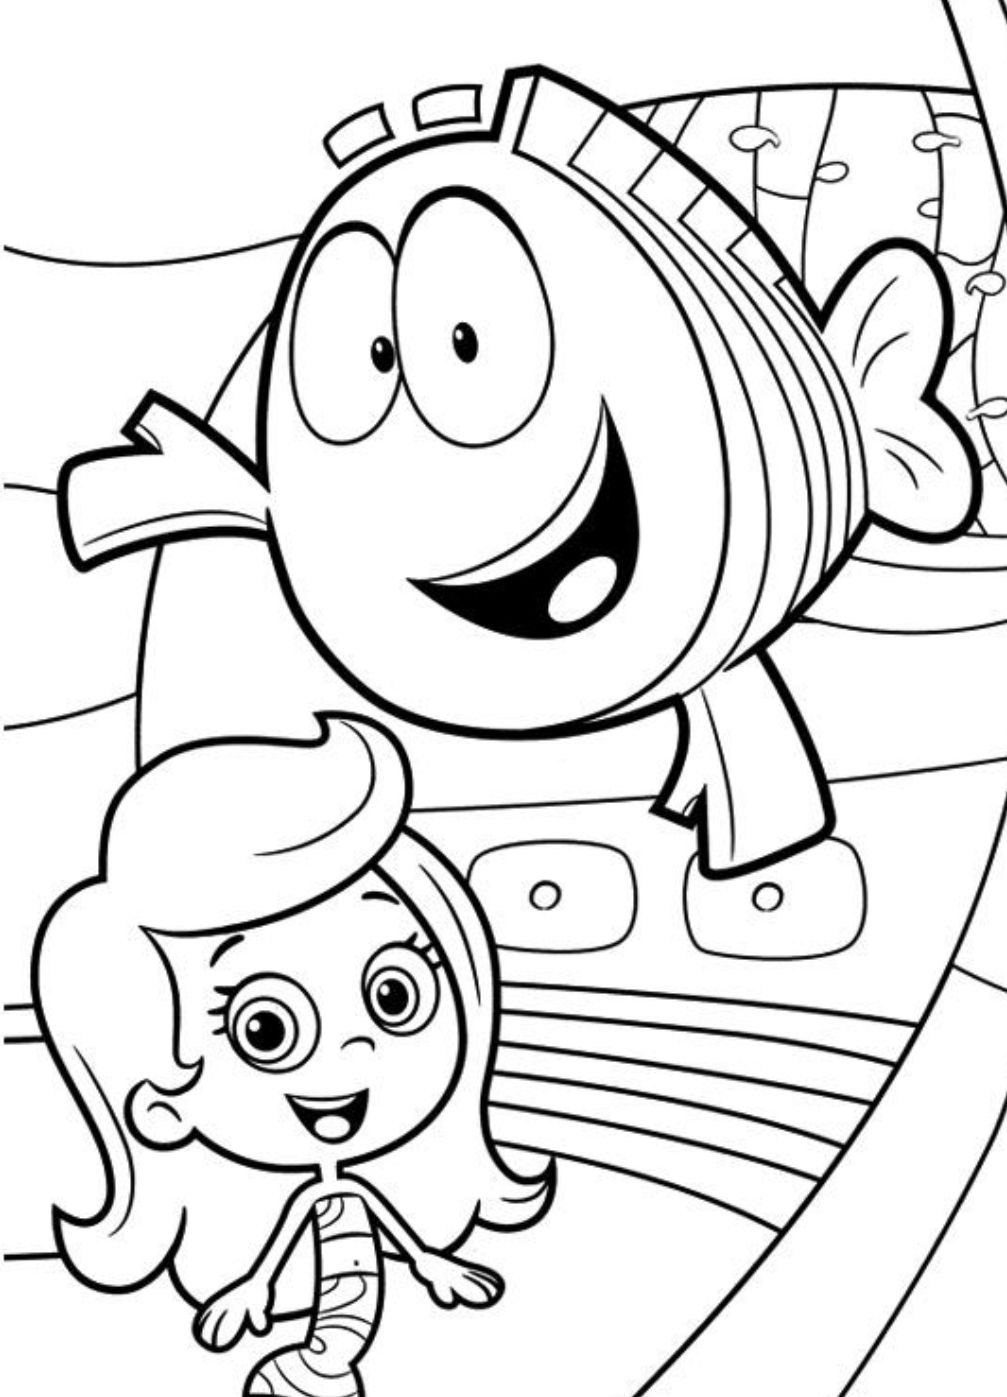 Printable Bubble Guppies Coloring Pages Coloring Pages For Kids Bubble Guppies With Bubble Guppies Coloring